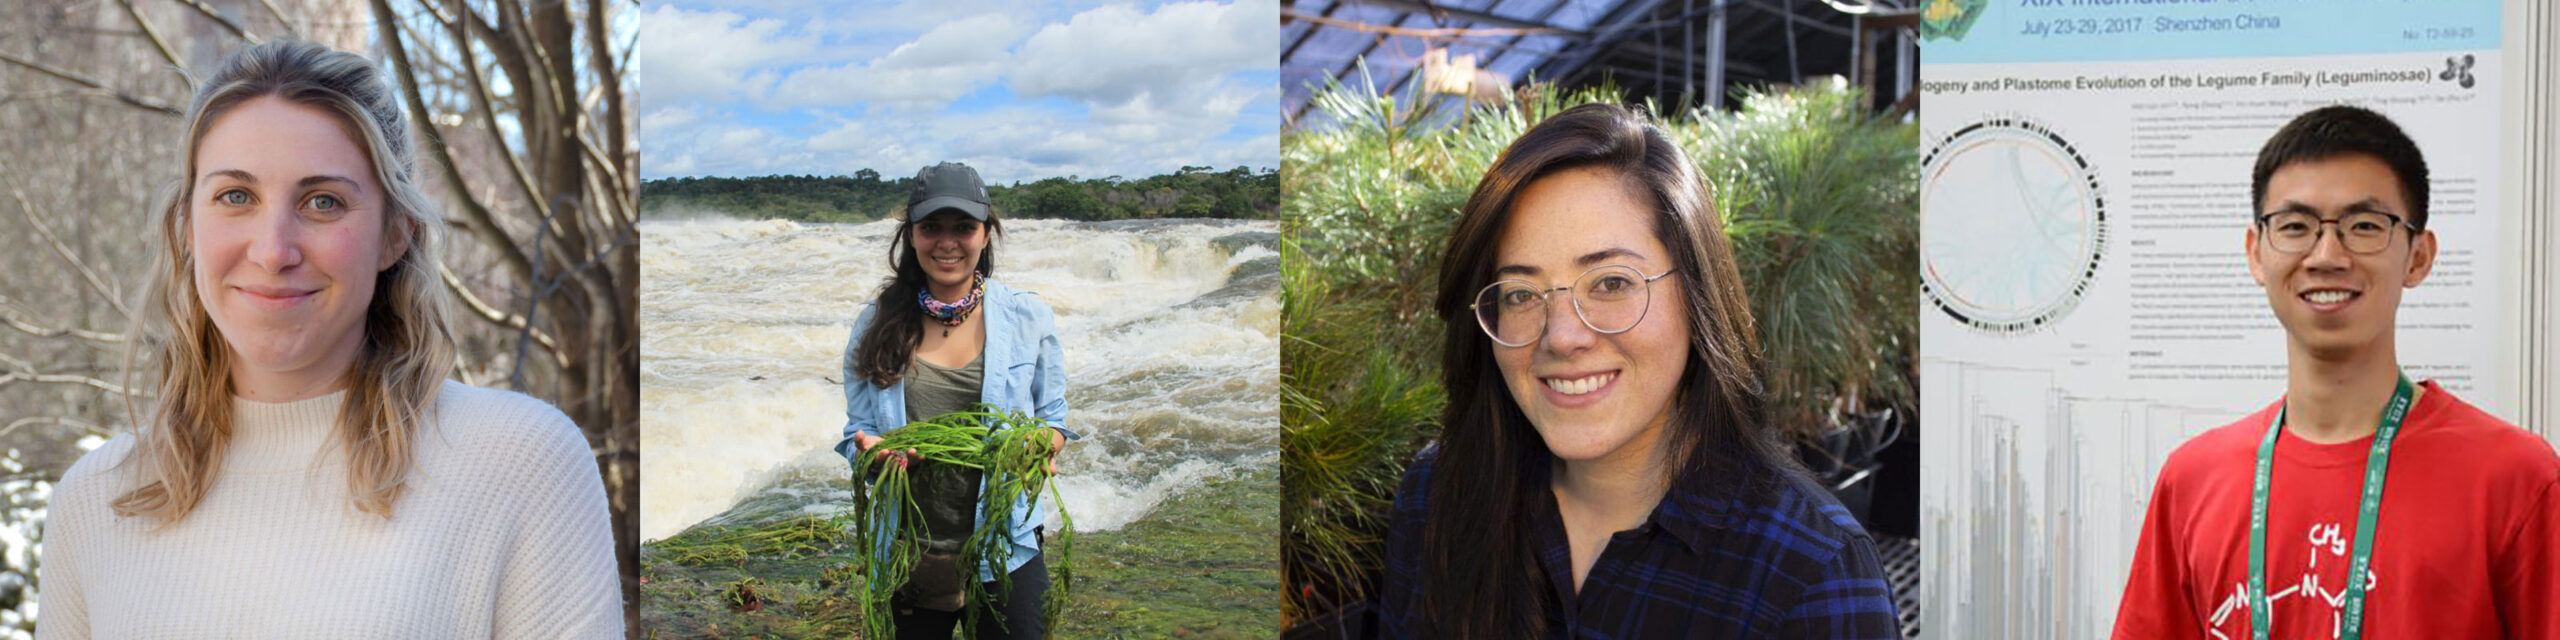 Four images of scientists who recently joined NYBG.